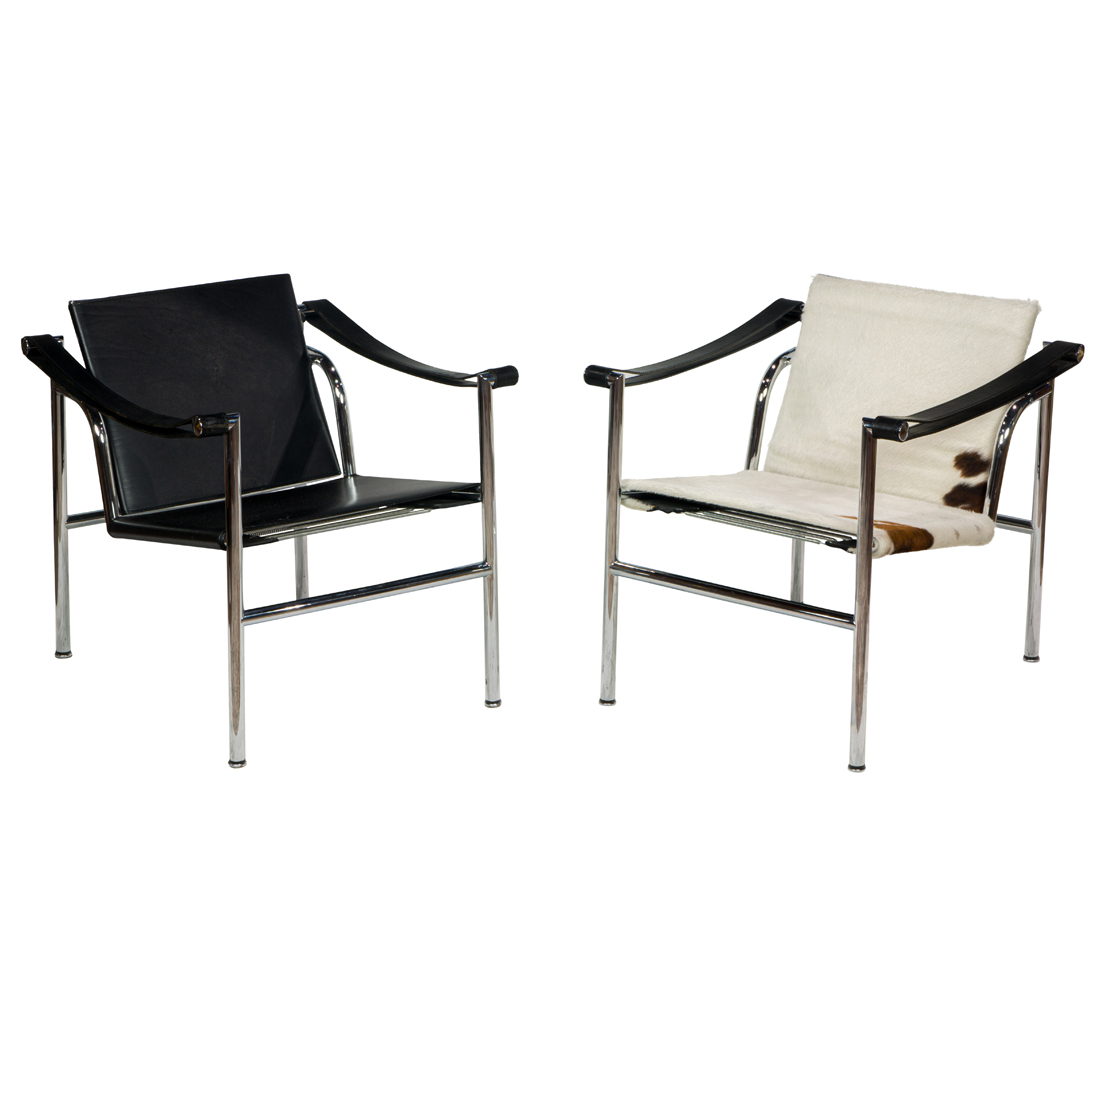 CHARLOTTE PERRIAND, PIERRE JEANNERET